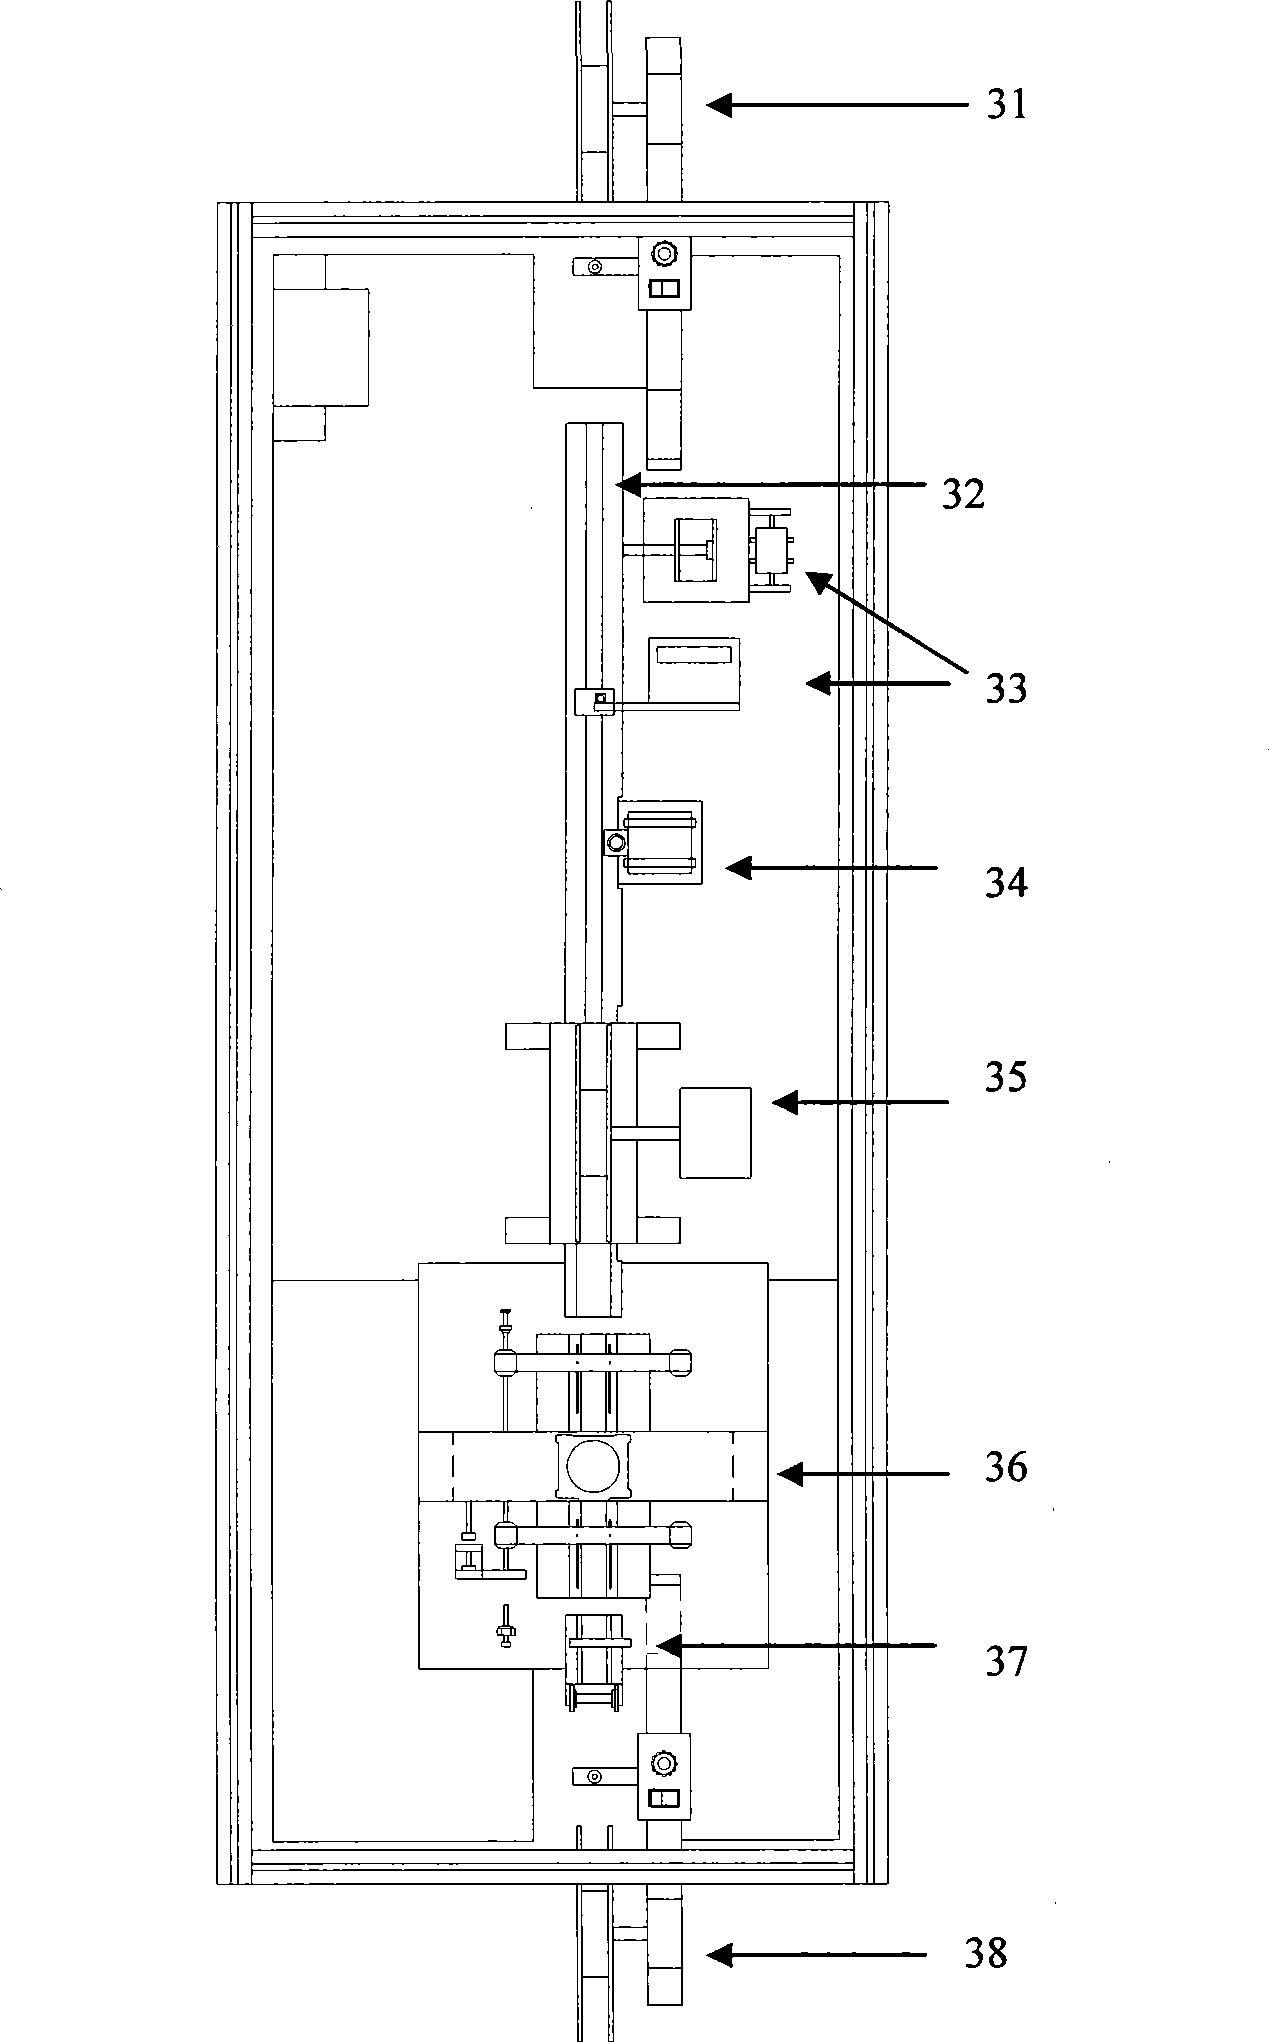 Double-interface card production method and equipment